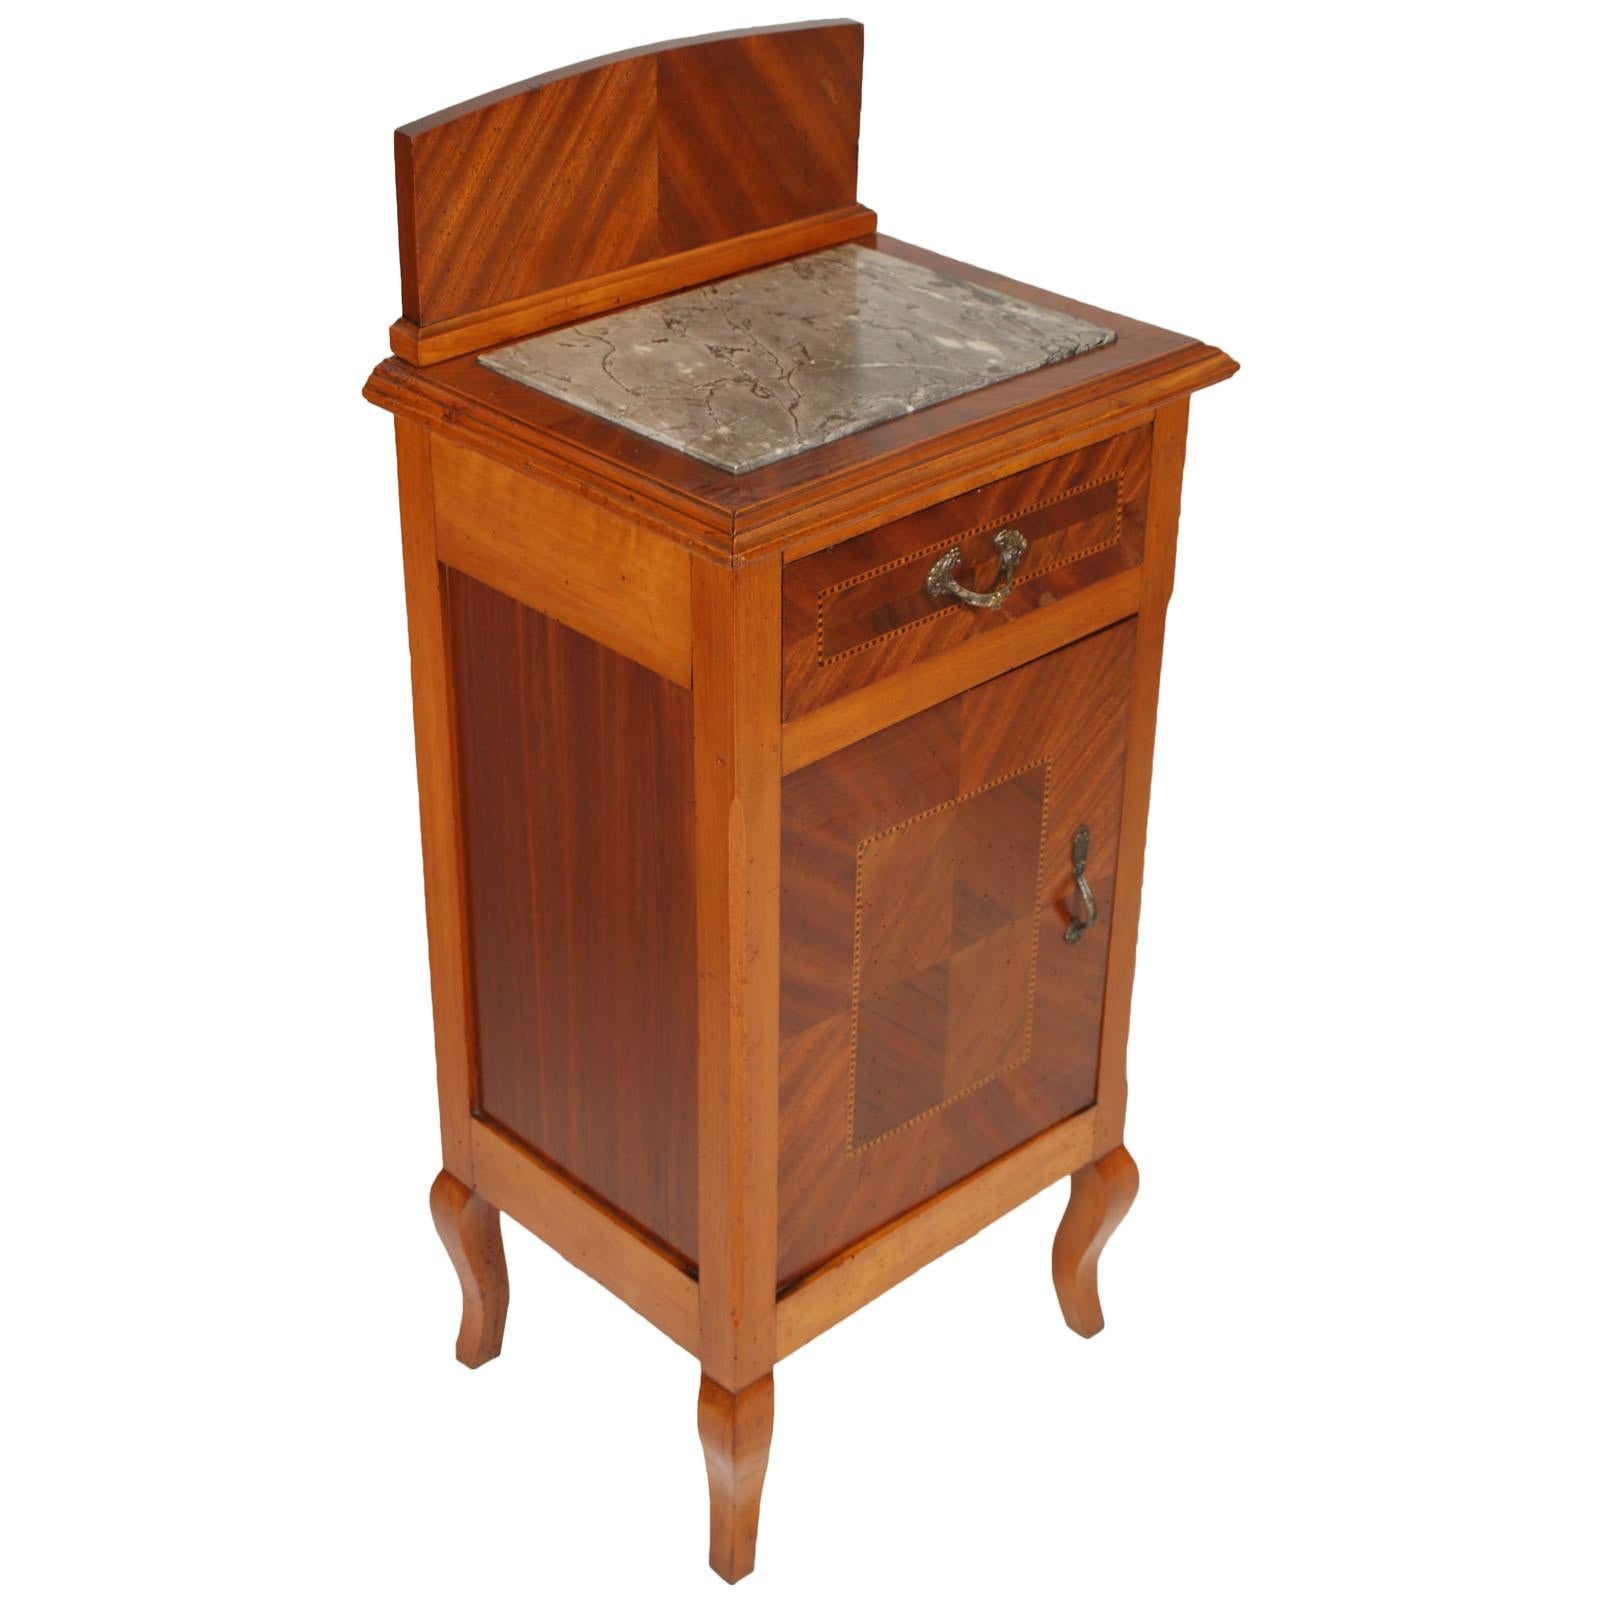 Pair of original Art Nouveau nightstands . Finely inlaid walnut with walnut, mahogany and maple folder. Stand with a mahogany herringbone folder. Gray marble top. Upper drawer and lower door inlaid with a herringbone pattern. Sides in mahogany